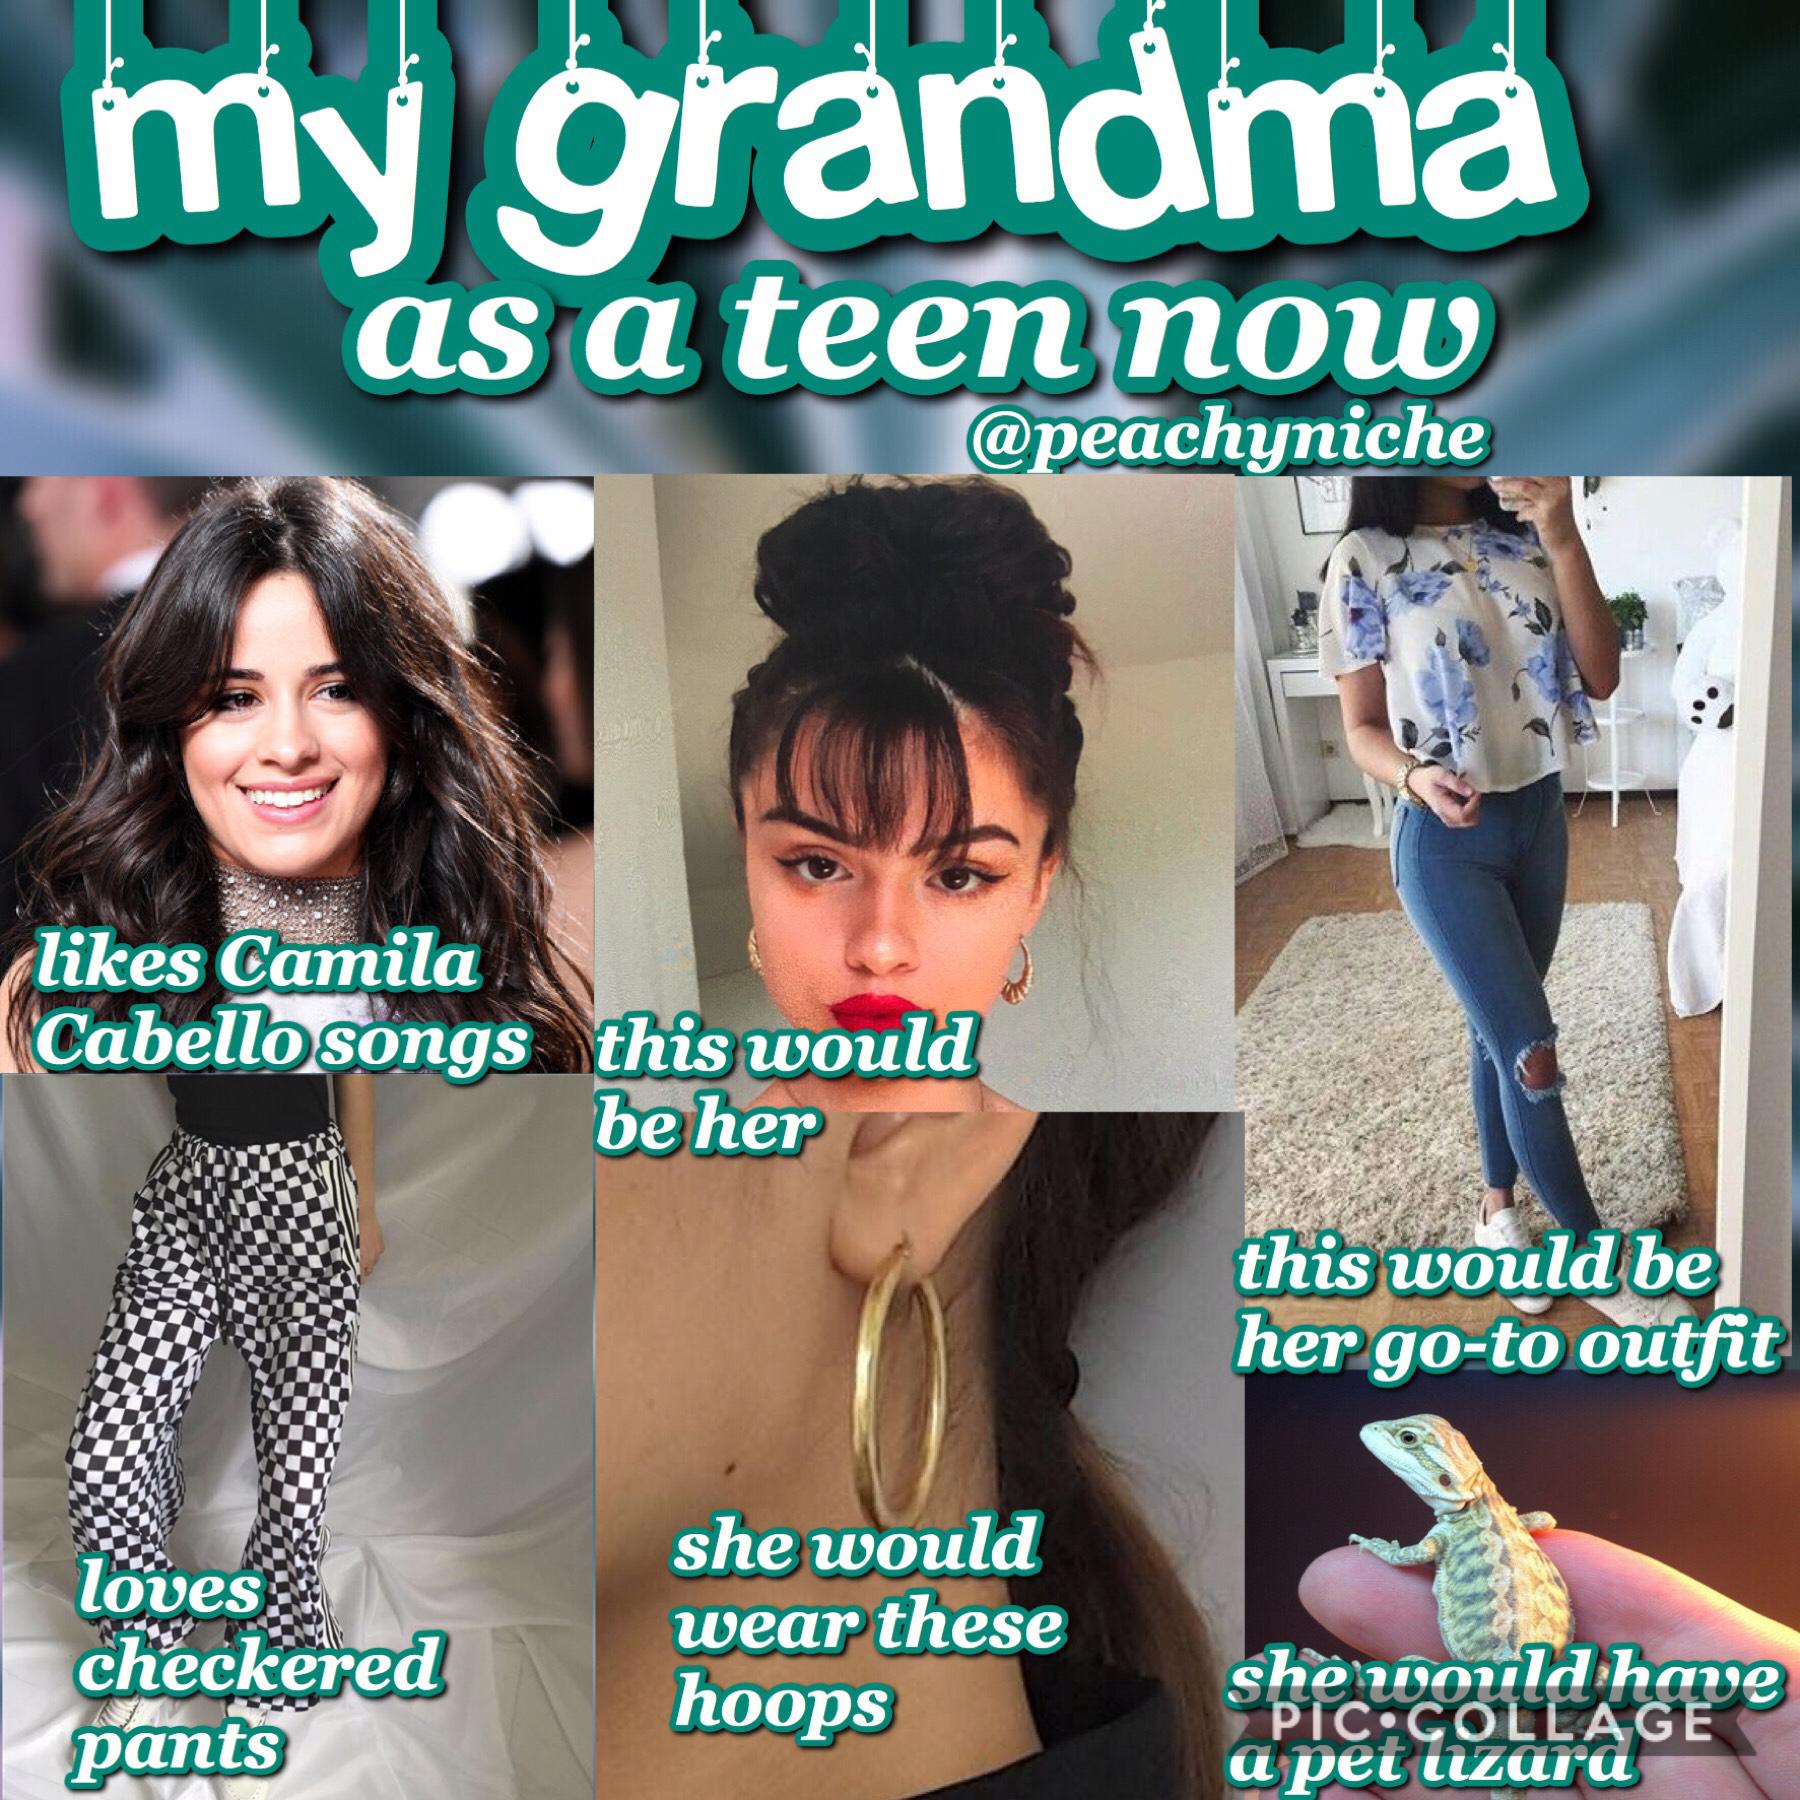 ♡Tap



peachyniche::❃
Hey everyone! This is my fav edit of this new theme. My grandma loves Camila Cabello😂😂. Comment below what you think I should do next.

—date:6/28/18
—time:4:55
—qotd: what should I do next?
::❃
